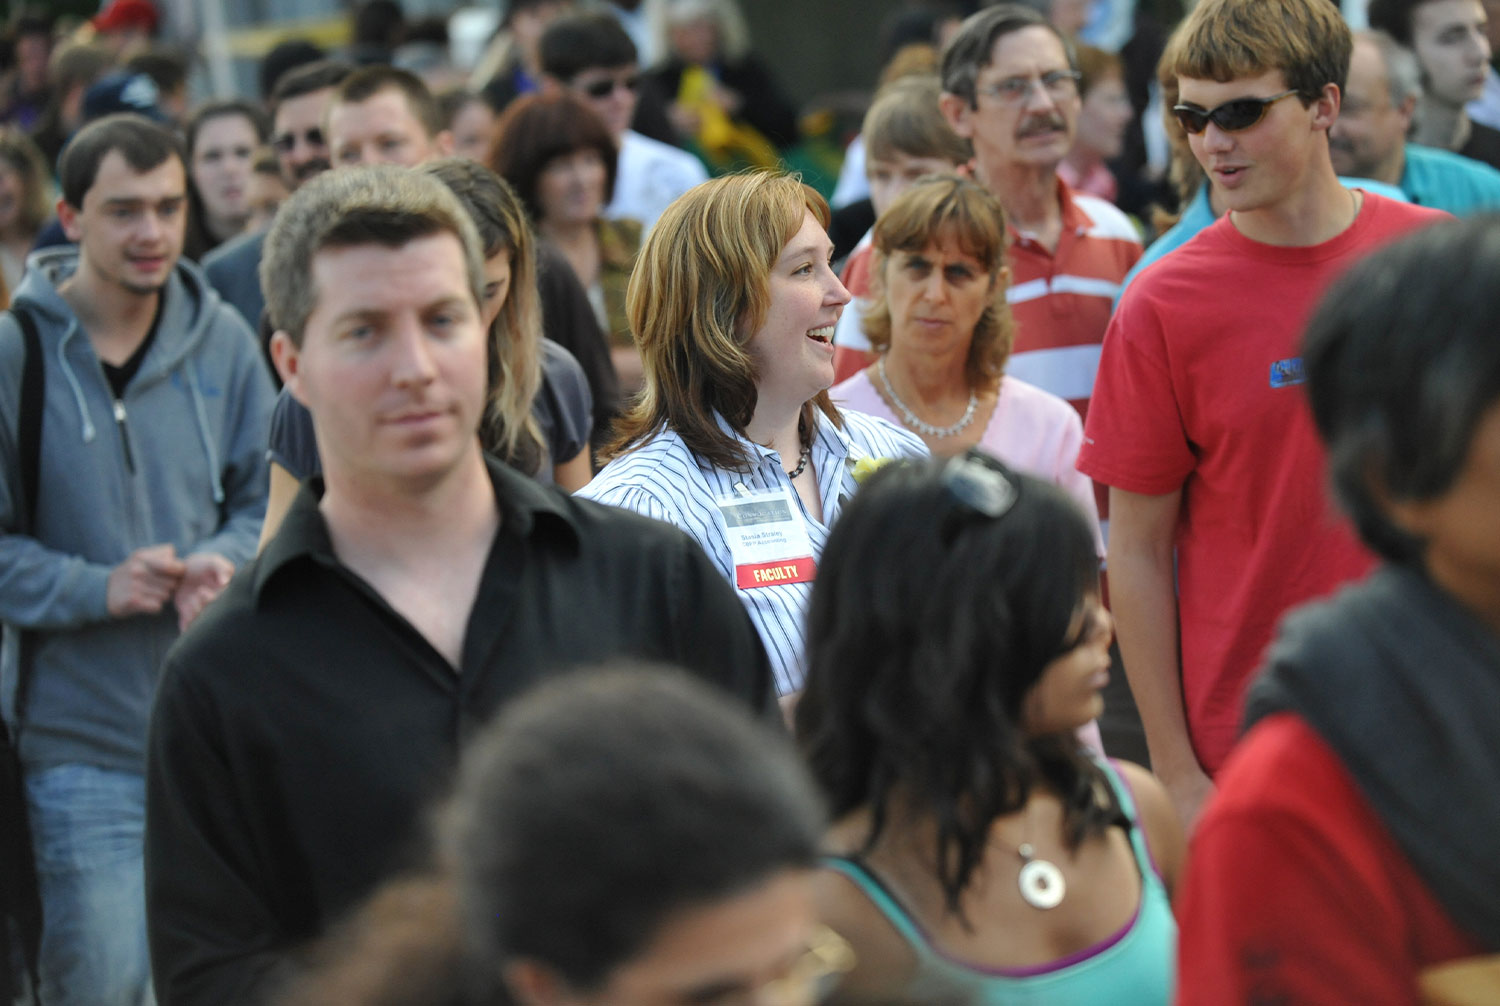 a woman wearing a faculty badge clipped to her collar talks to a young man while standing in a large crowd